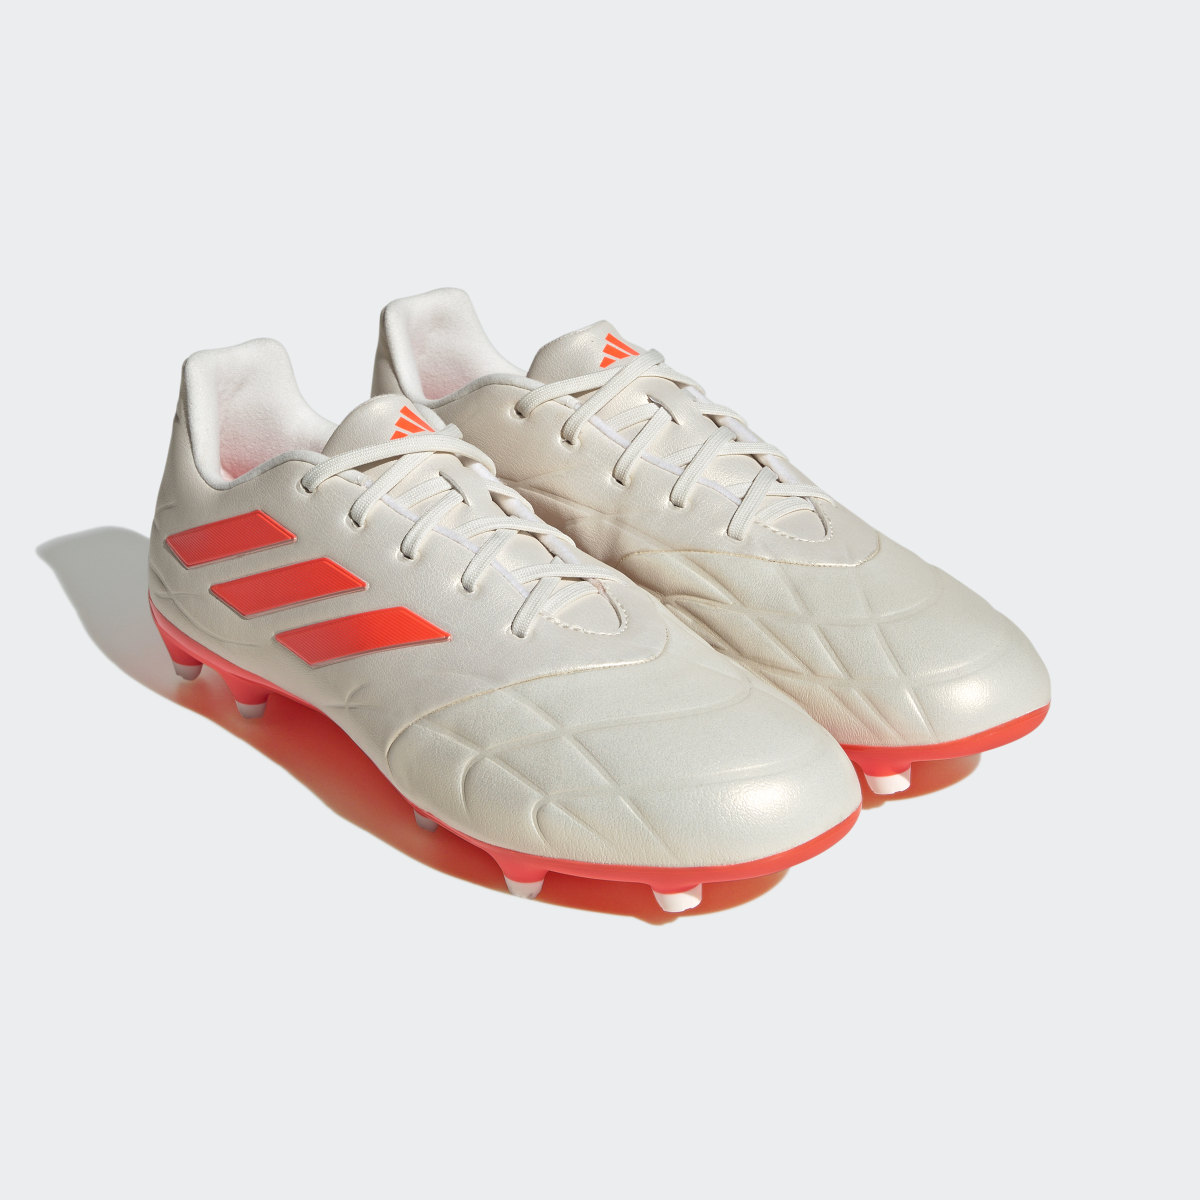 Adidas Copa Pure.3 Firm Ground Soccer Cleats. 5